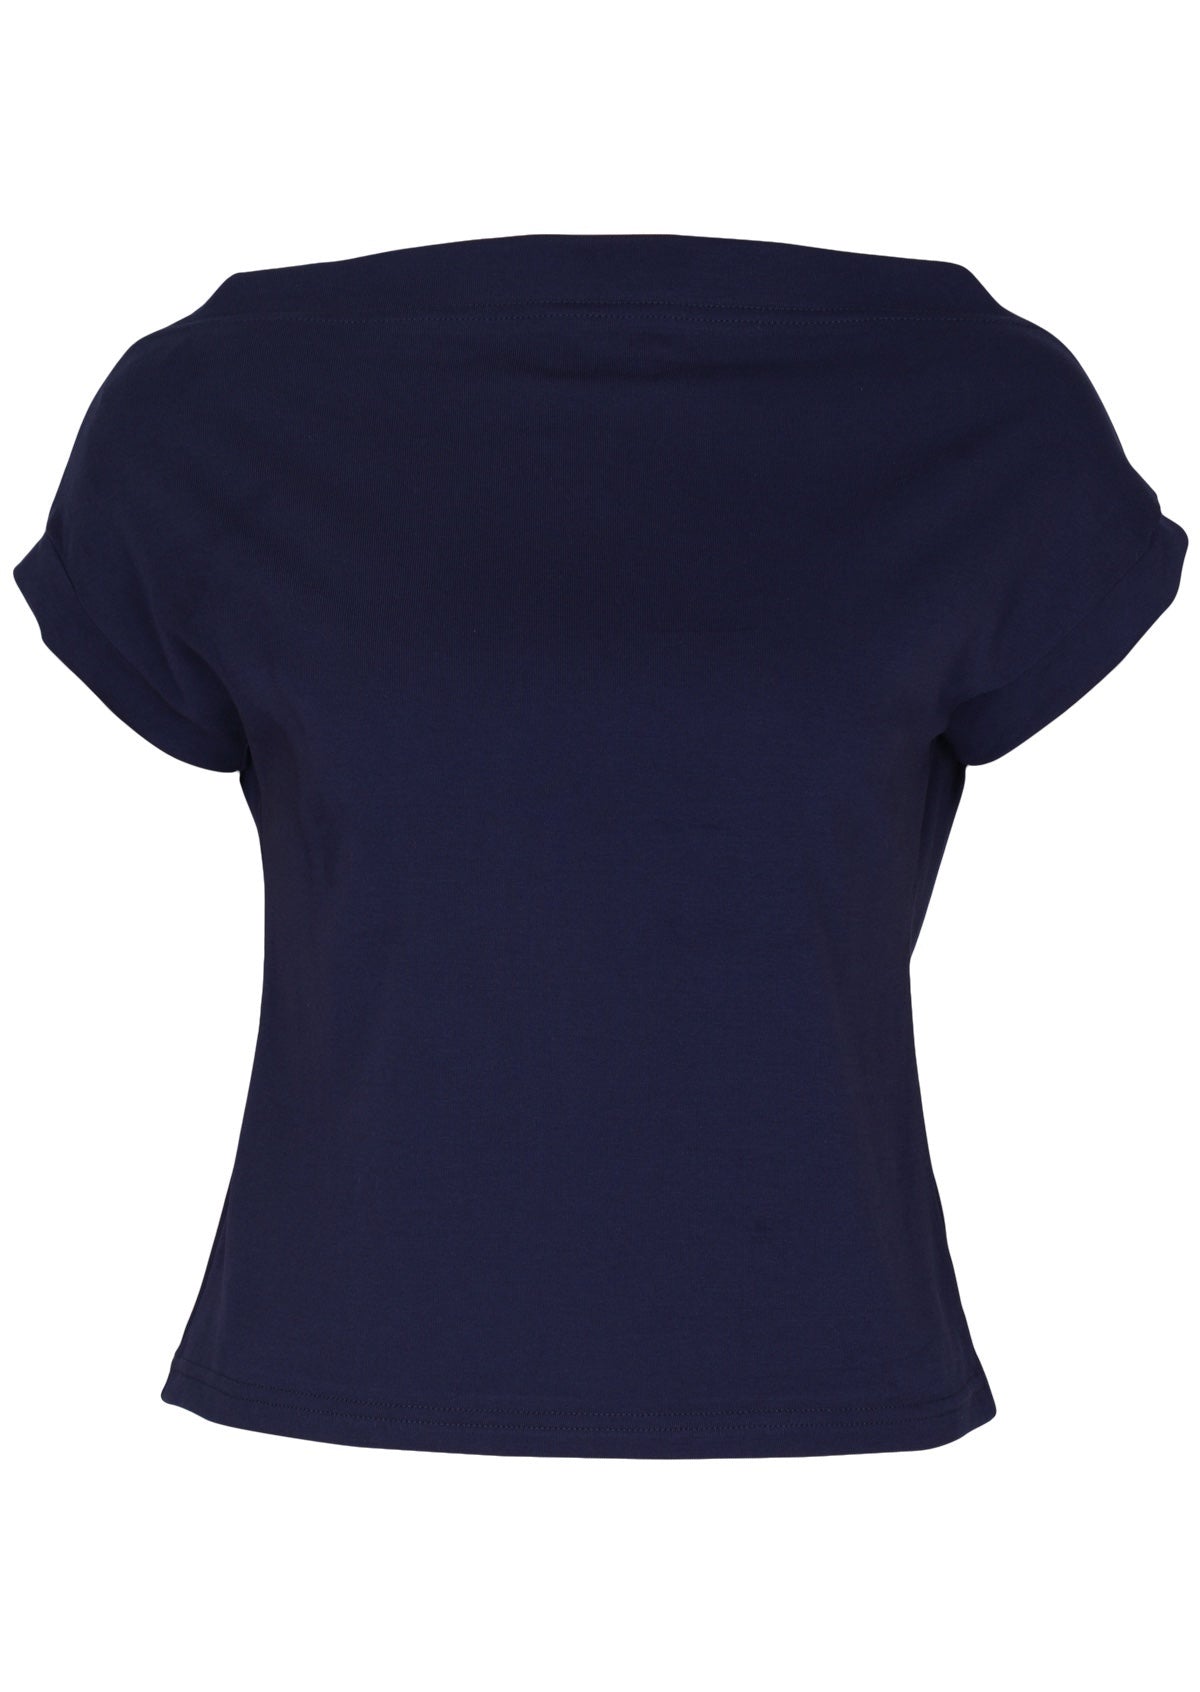 Front view of women's wide neck mod navy blue stretch rayon boat neck top